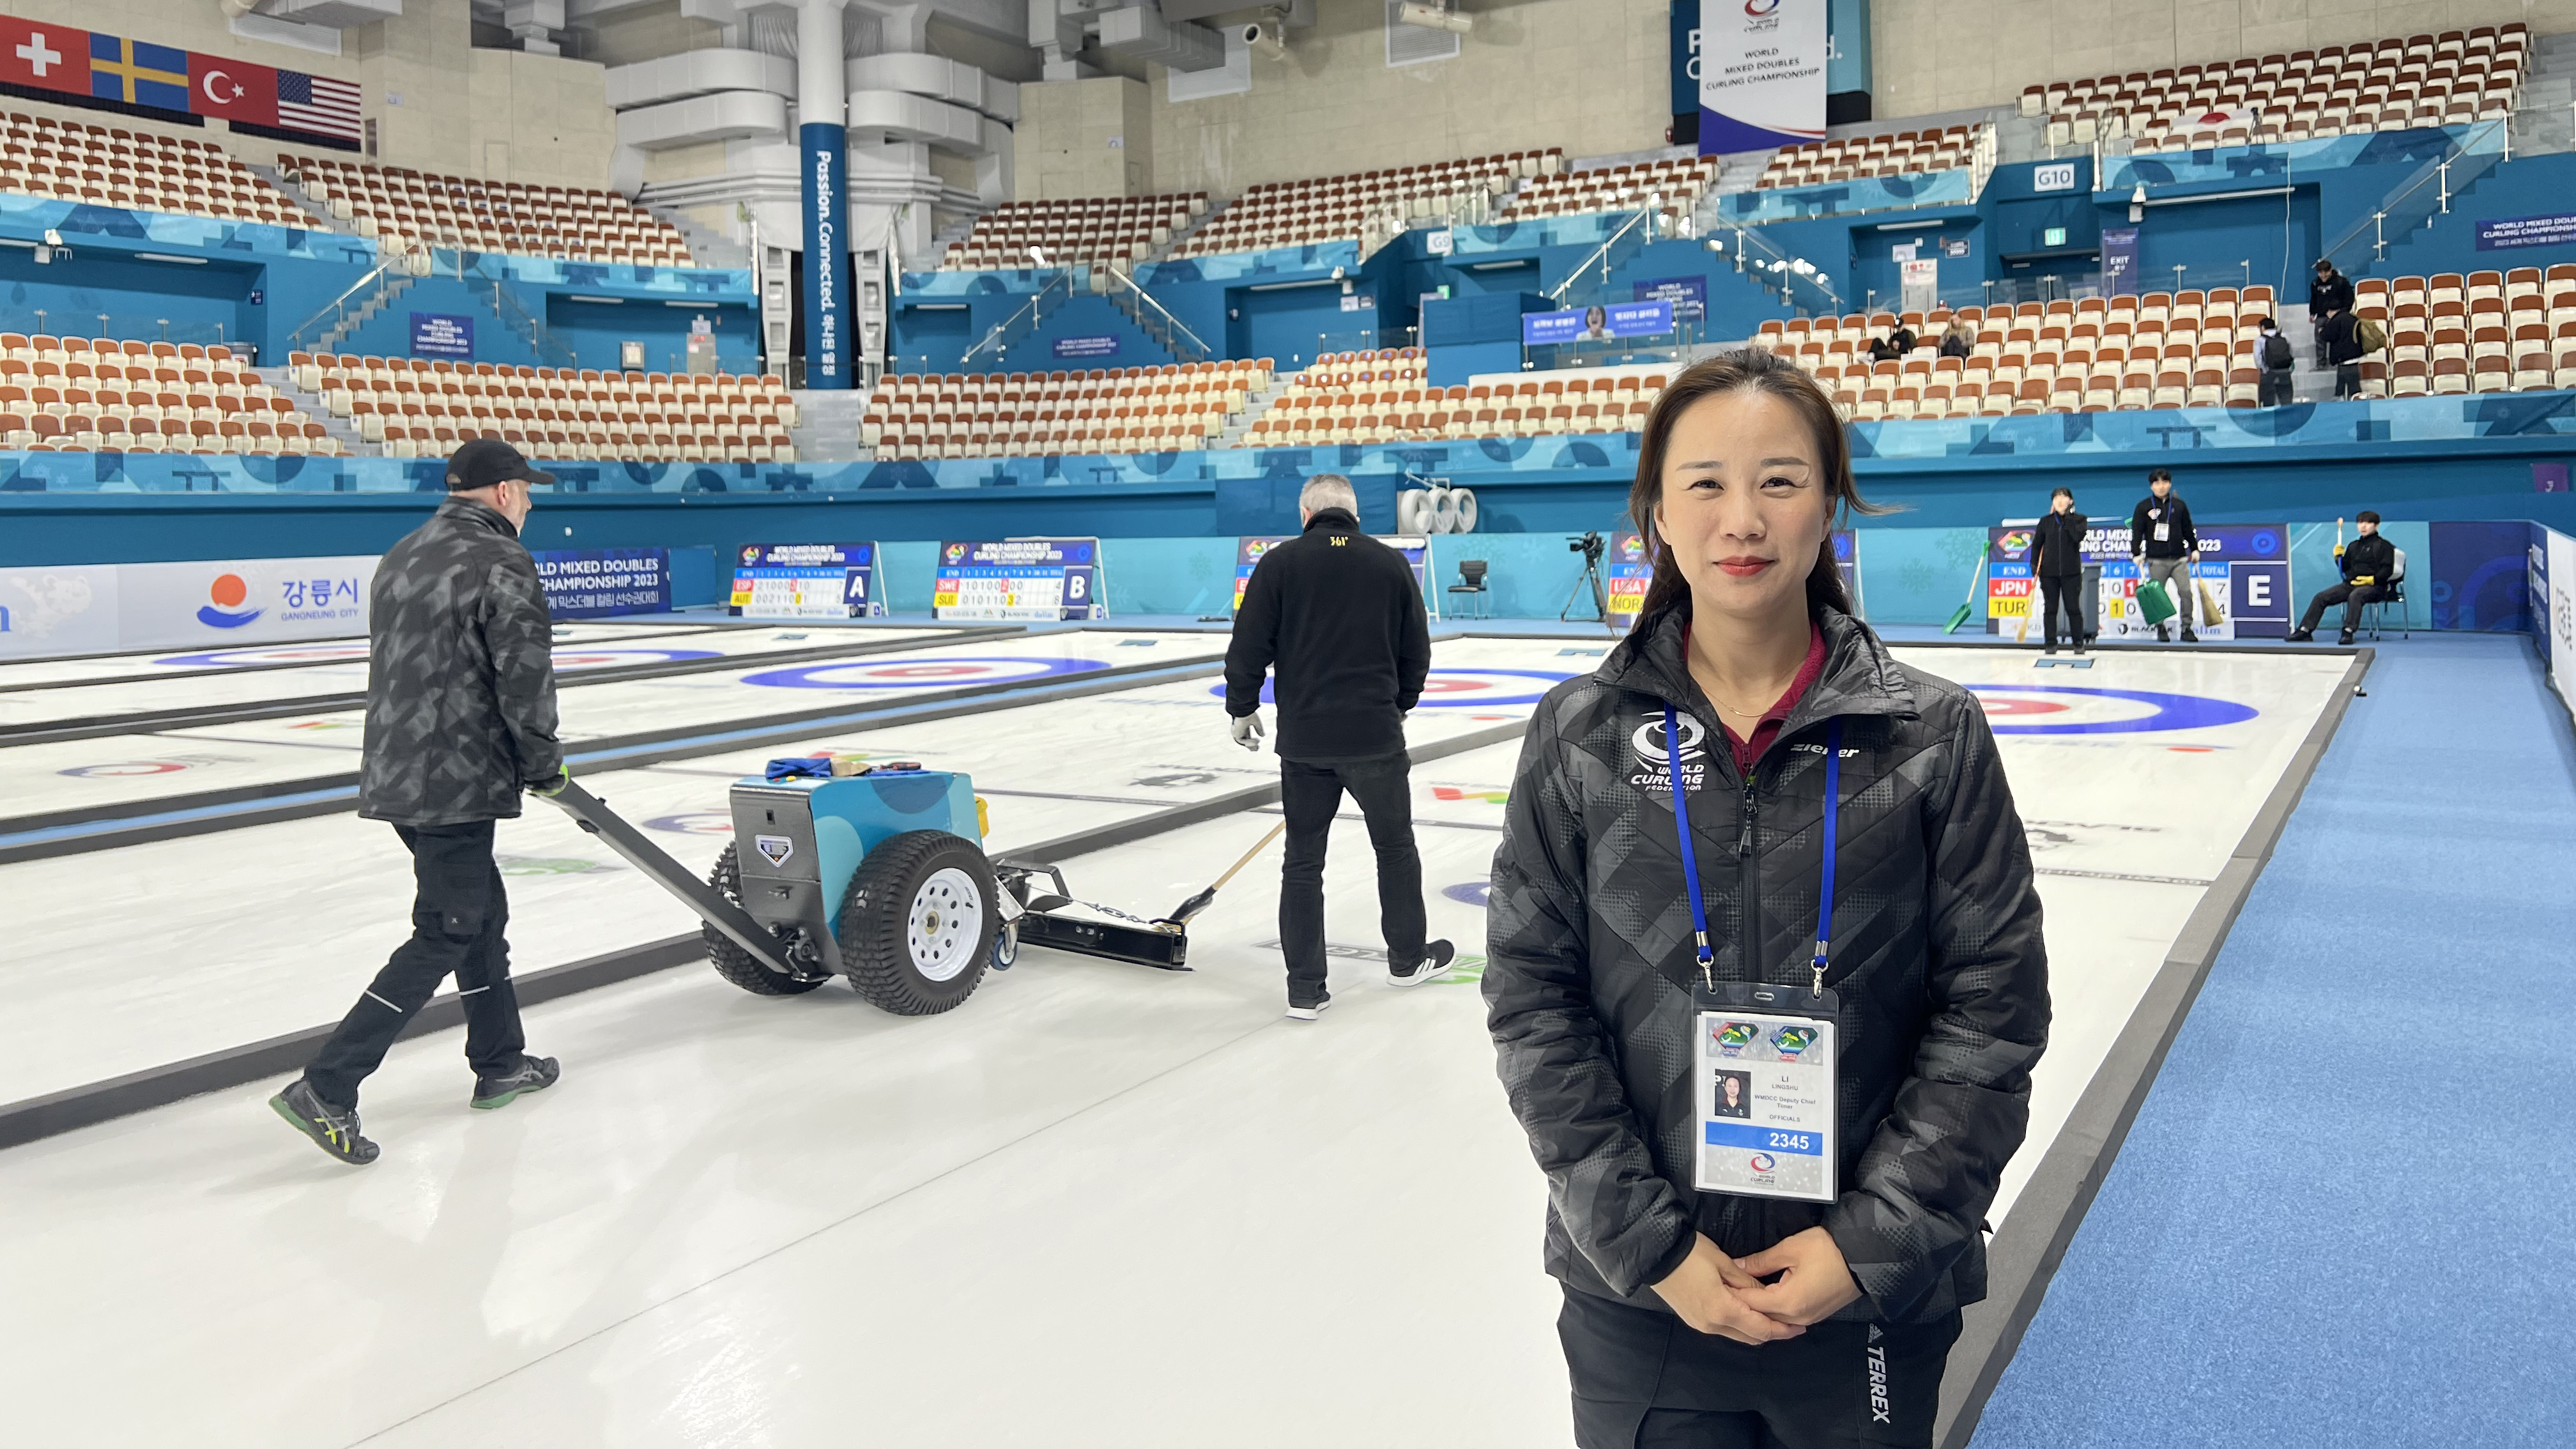 SISU SISUs faculty umpires in the World Mixed Doubles Curling Championship